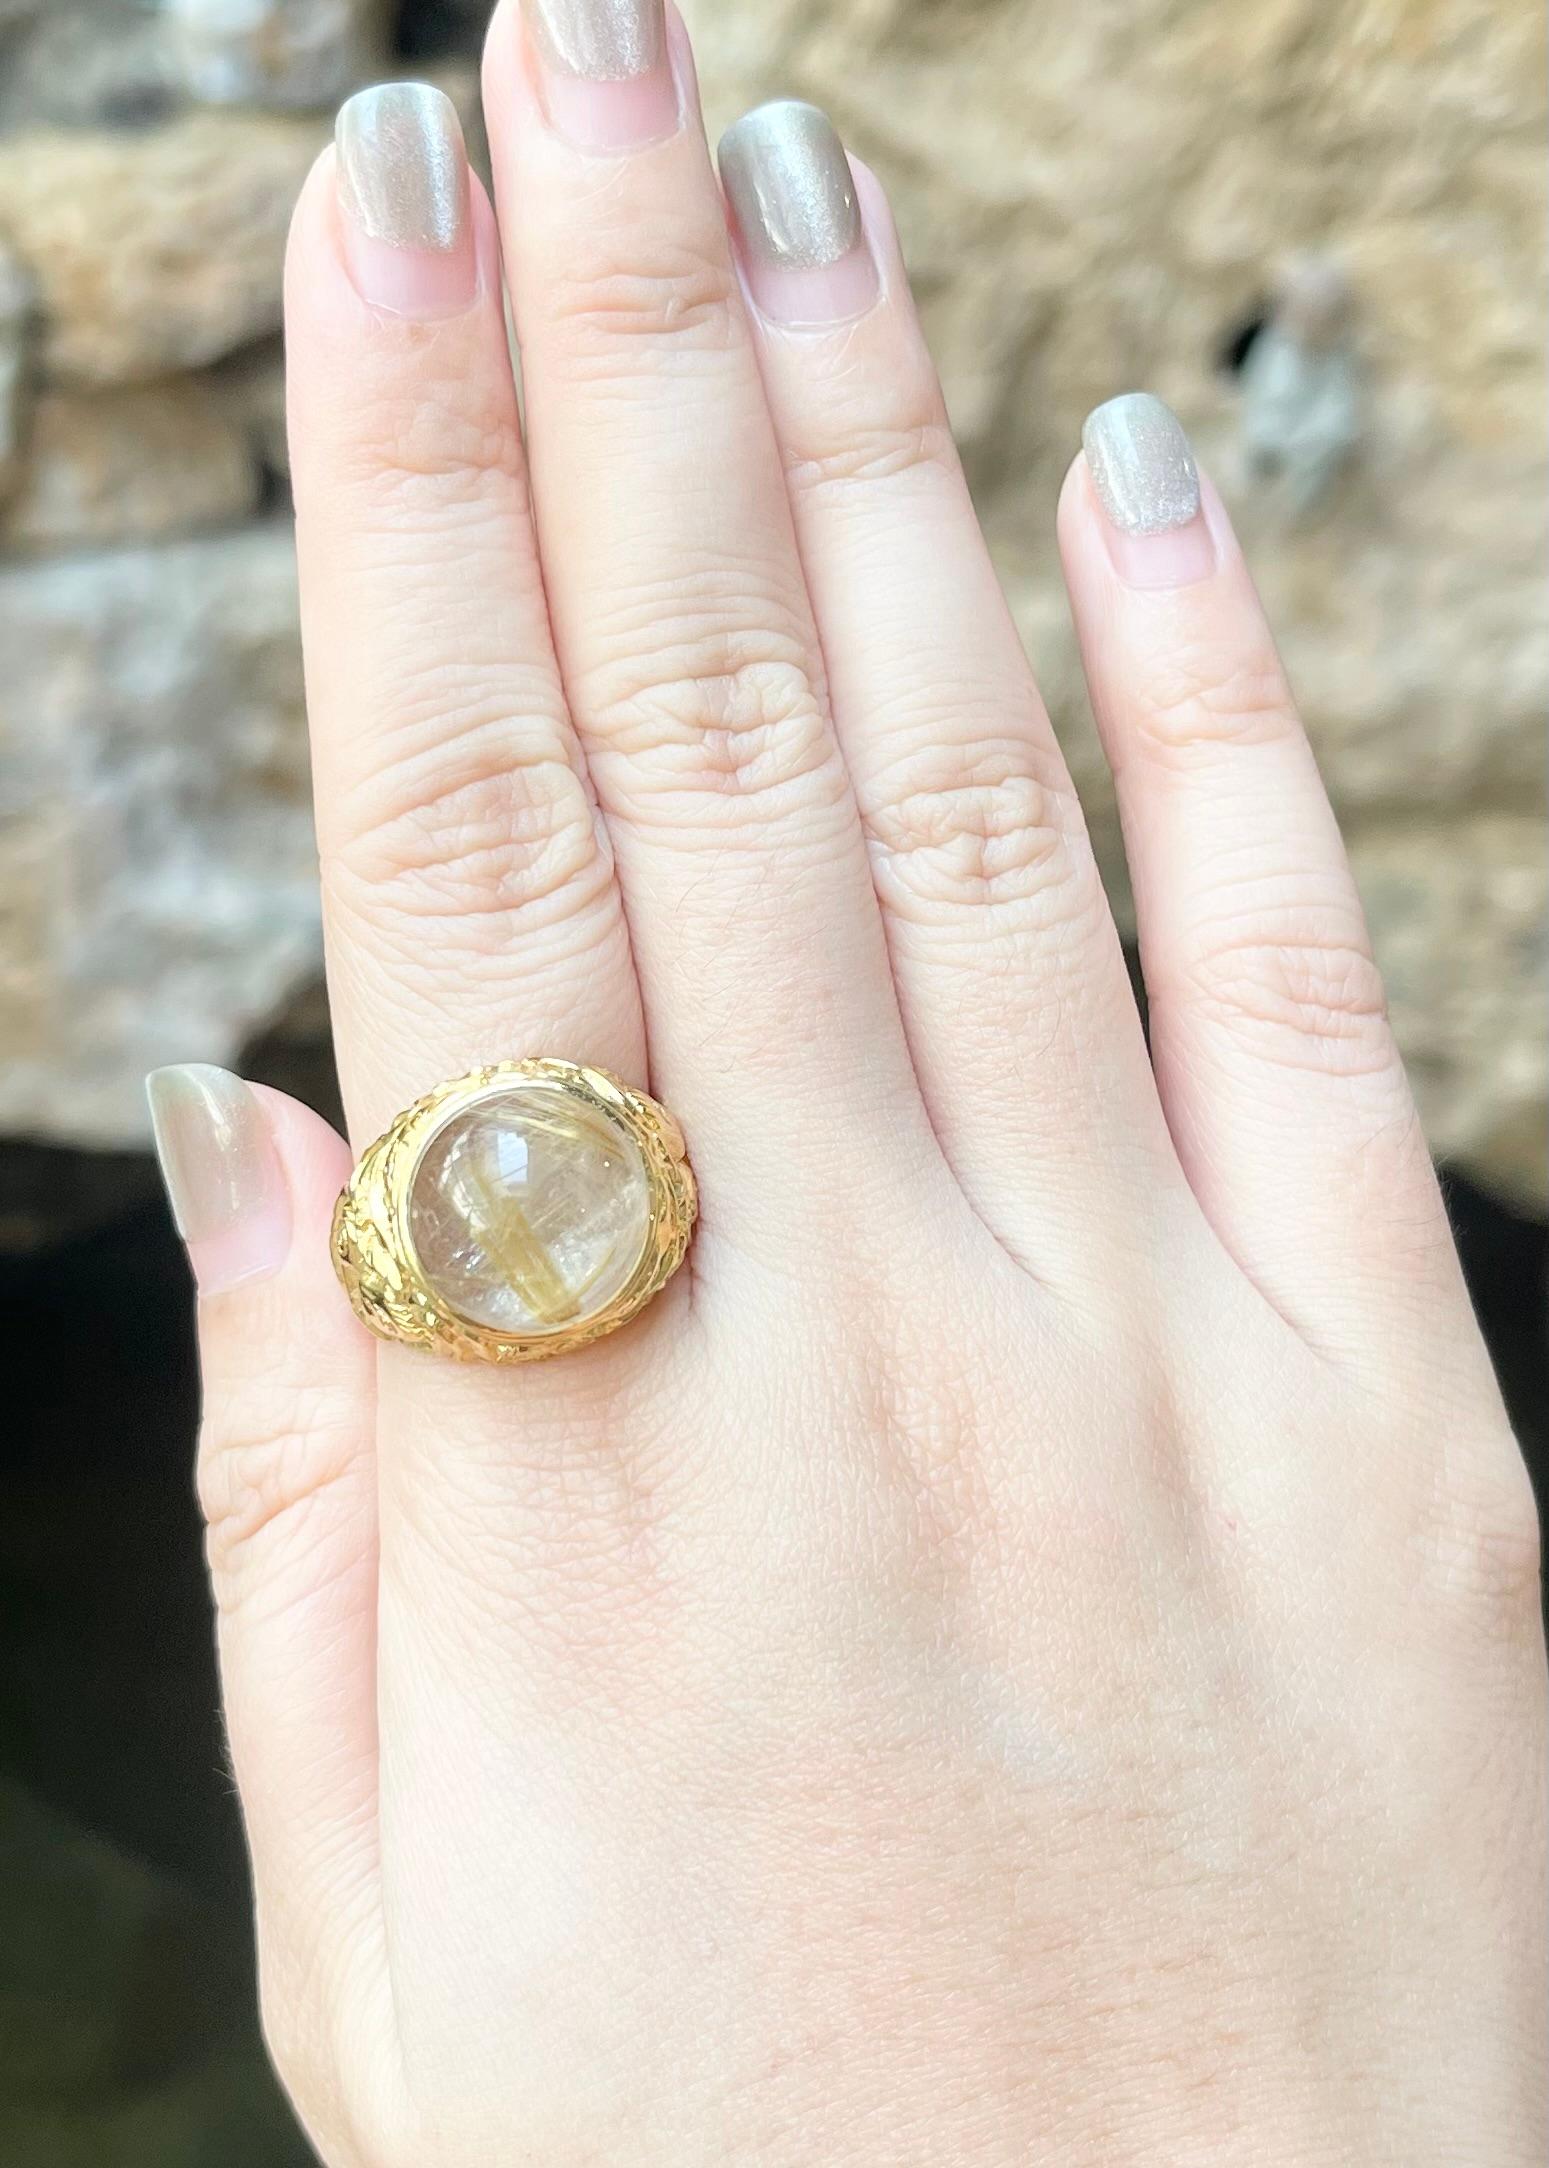 Rutilated Quartz 13.15 carats Ring set in 18K Gold Settings

Width:  2.0 cm 
Length: 2.0 cm
Ring Size: 68
Total Weight: 17.72 grams

